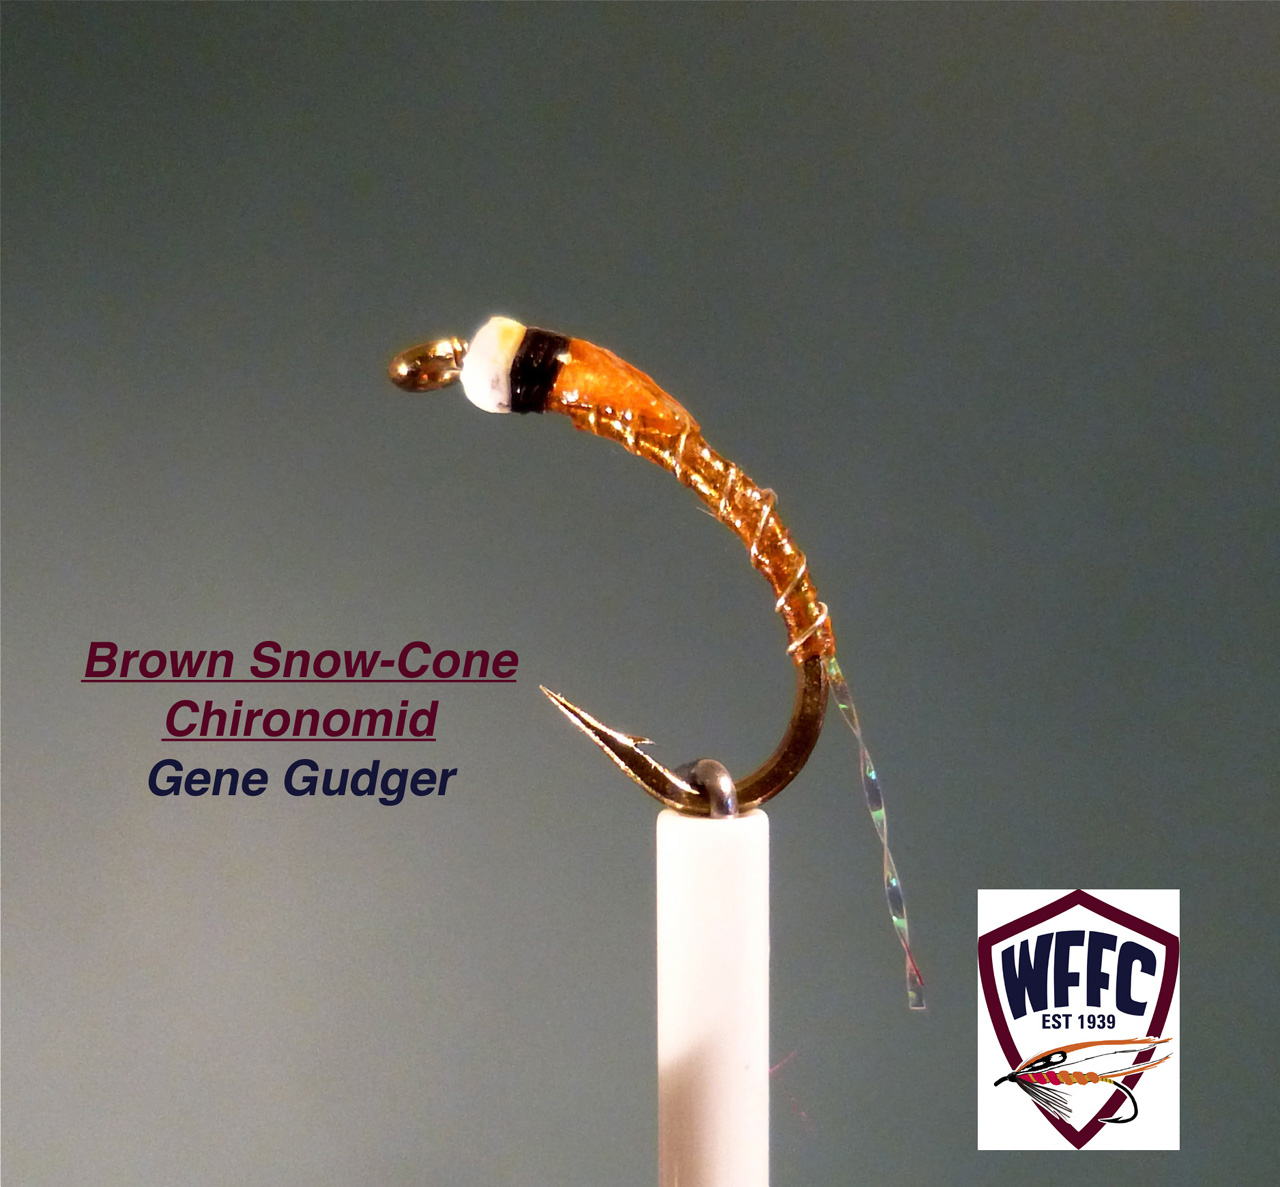 Brown Snow-Cone Chironomid